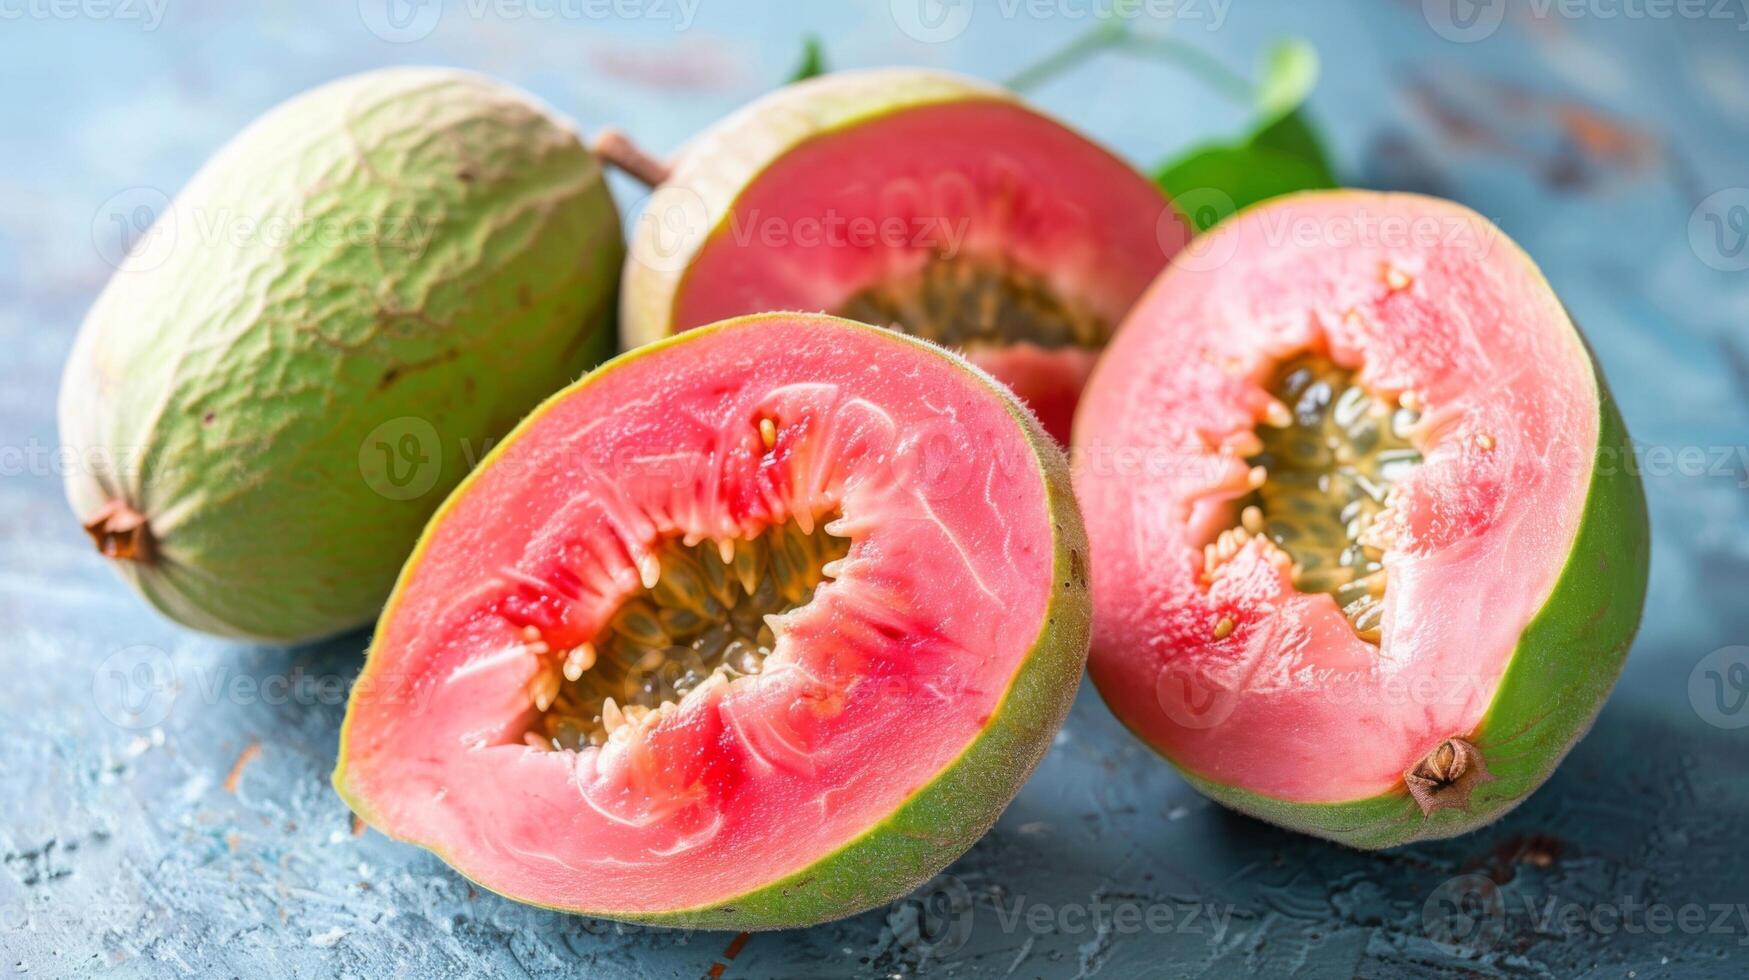 Fresh guava fruit with succulent pink flesh and seeds displayed on a textured background photo